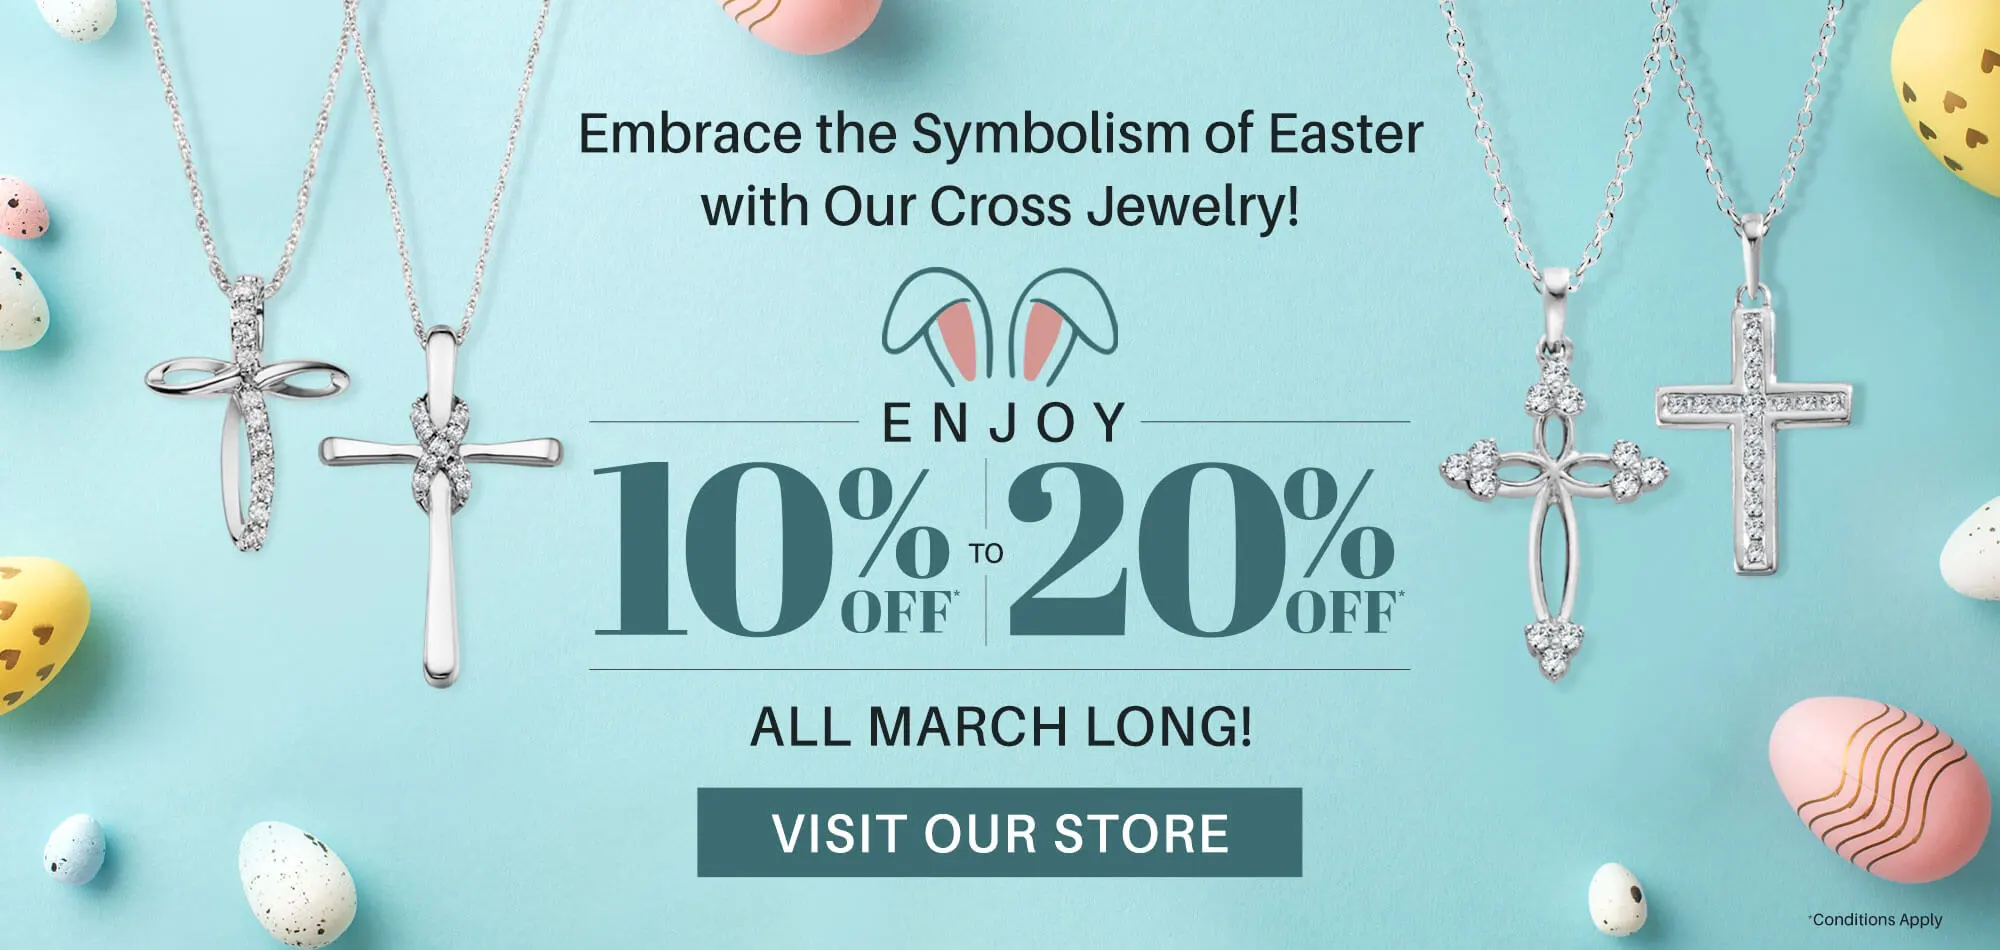 Easter Cross Jewelry Sale at M and M Jewelers